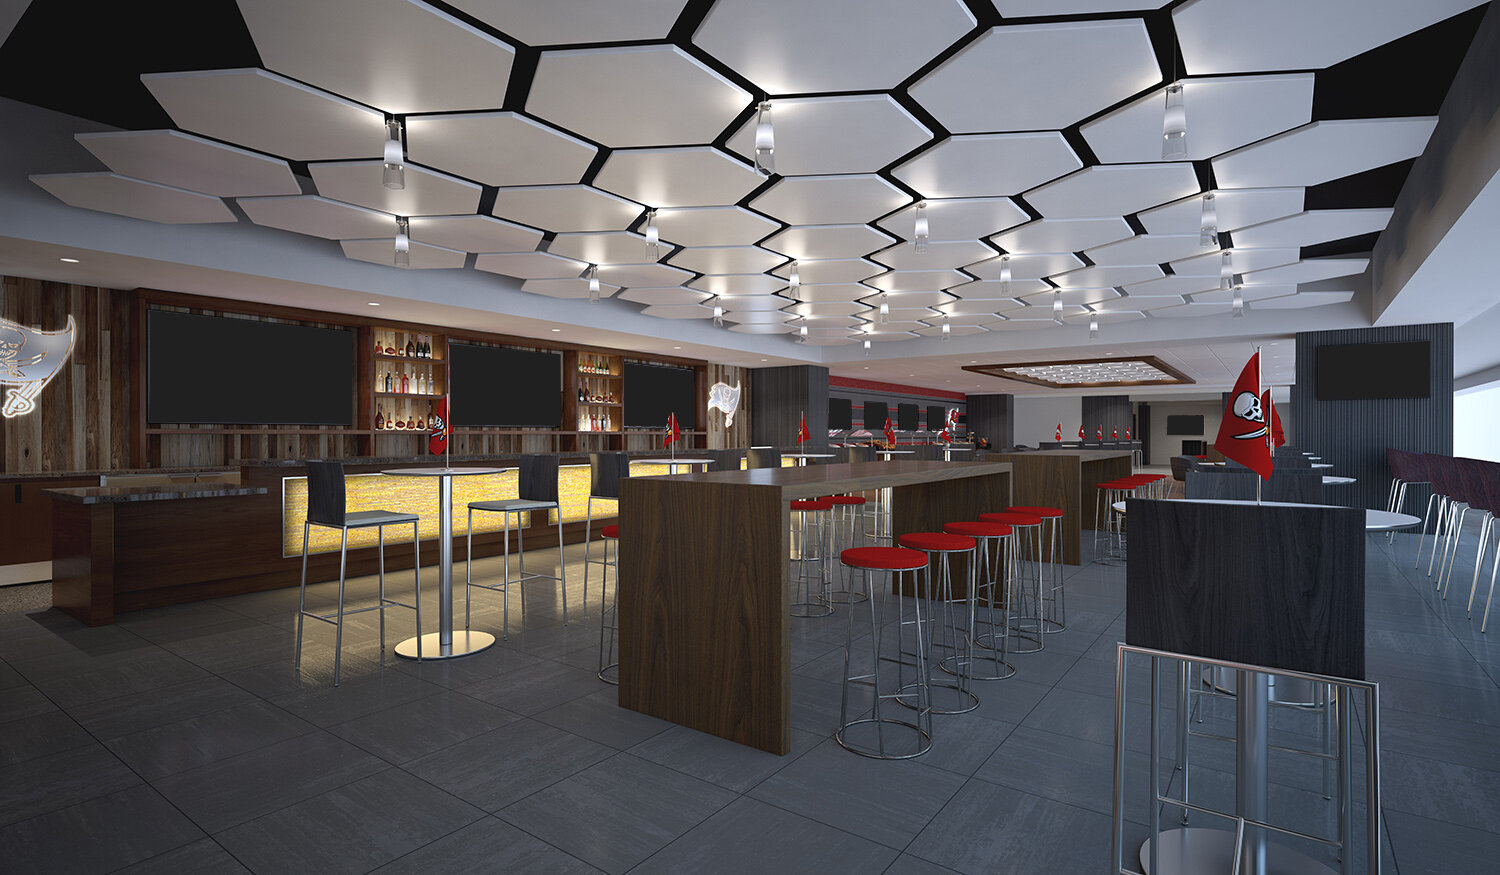 Hexagon shaped tiles decorate the ceiling  above the bar area of the Hall of Fame Club.